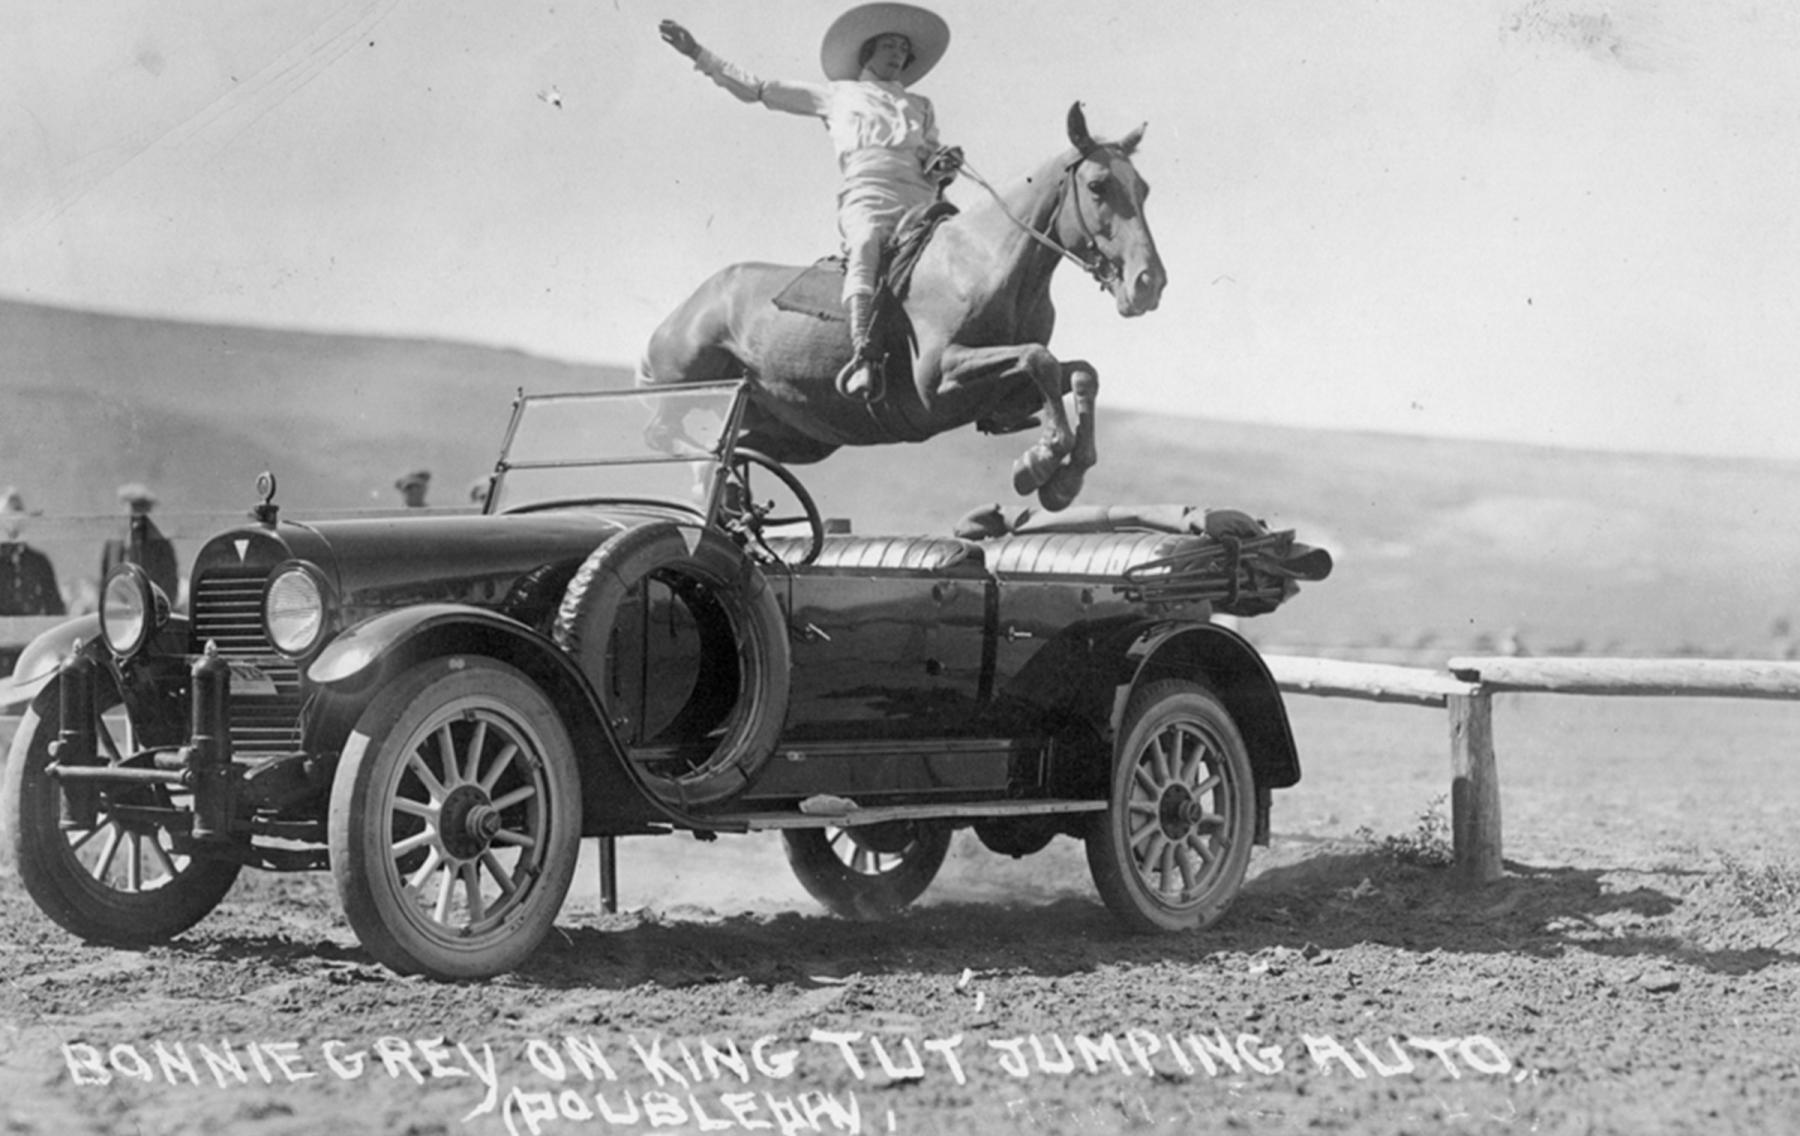 Tourist postcards became widespread after World War I, with the advent of the automobile culture. Here, Bonnie Grey in Wyoming jumps a car on her horse, King Tut, in the mid 1920s. Wyoming State Archives.